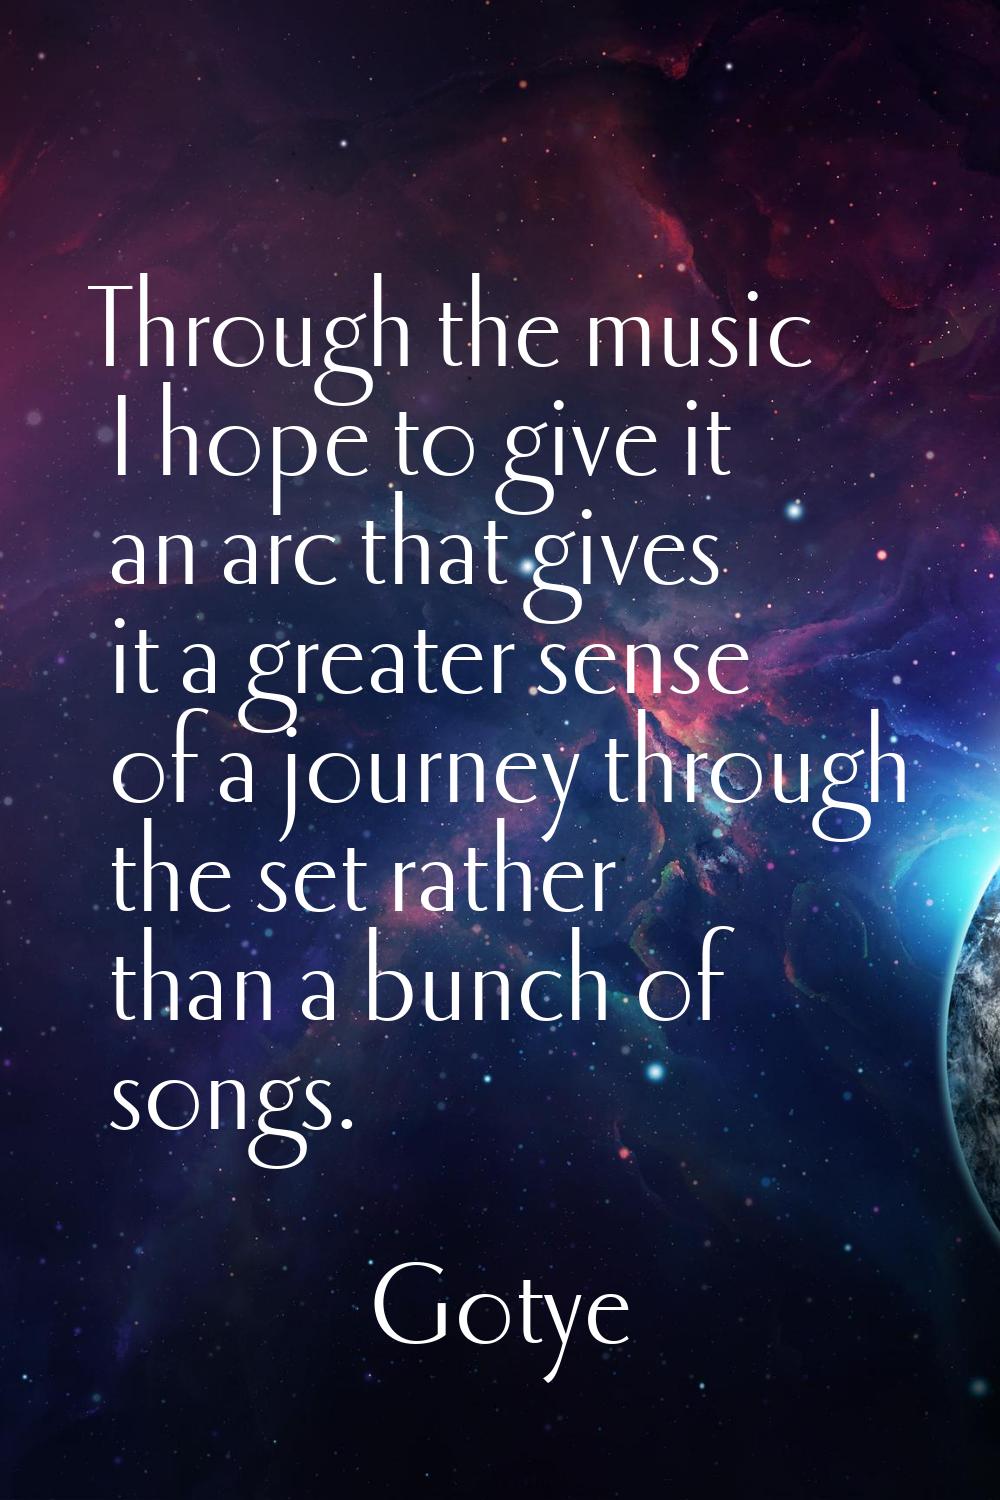 Through the music I hope to give it an arc that gives it a greater sense of a journey through the s